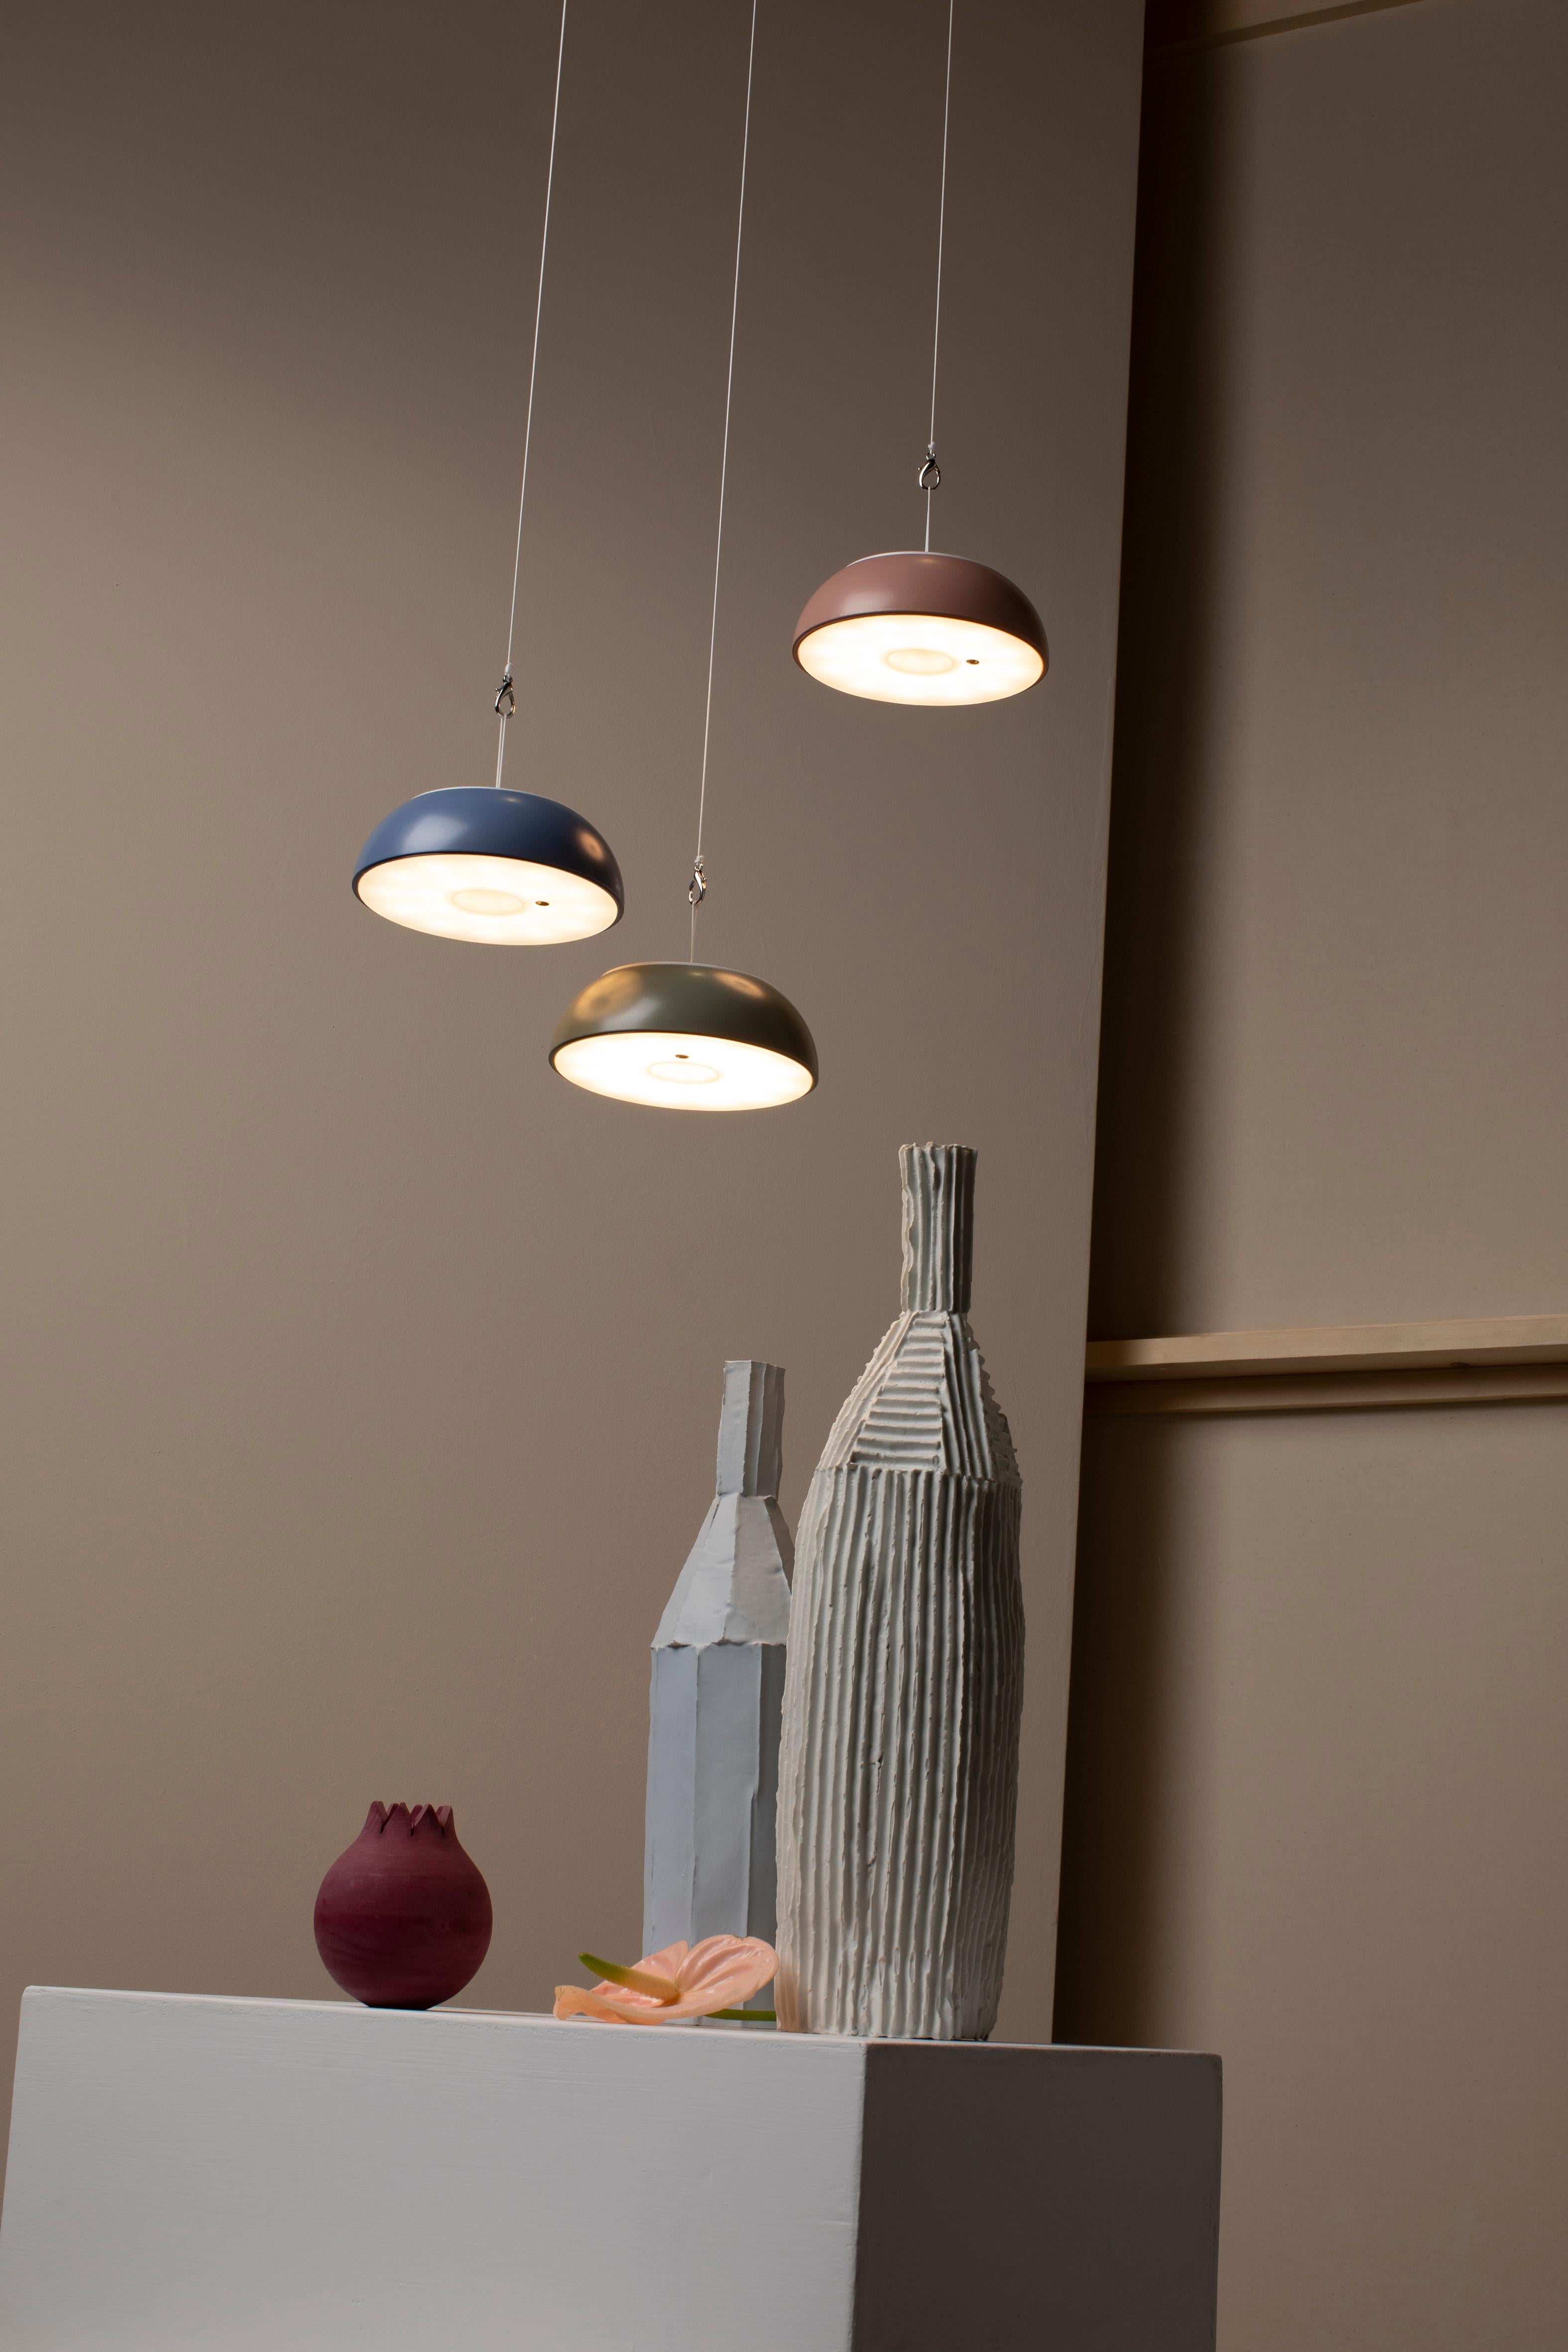 Axolight Float Suspension Lamp in Mauve Dust Aluminum by Mario Alessiani

From the ingenuity of Axolight and the creativity of the designer Mario Alessiani, Float was born, a multifunctional and portable lamp, usable both outdoors and indoors,